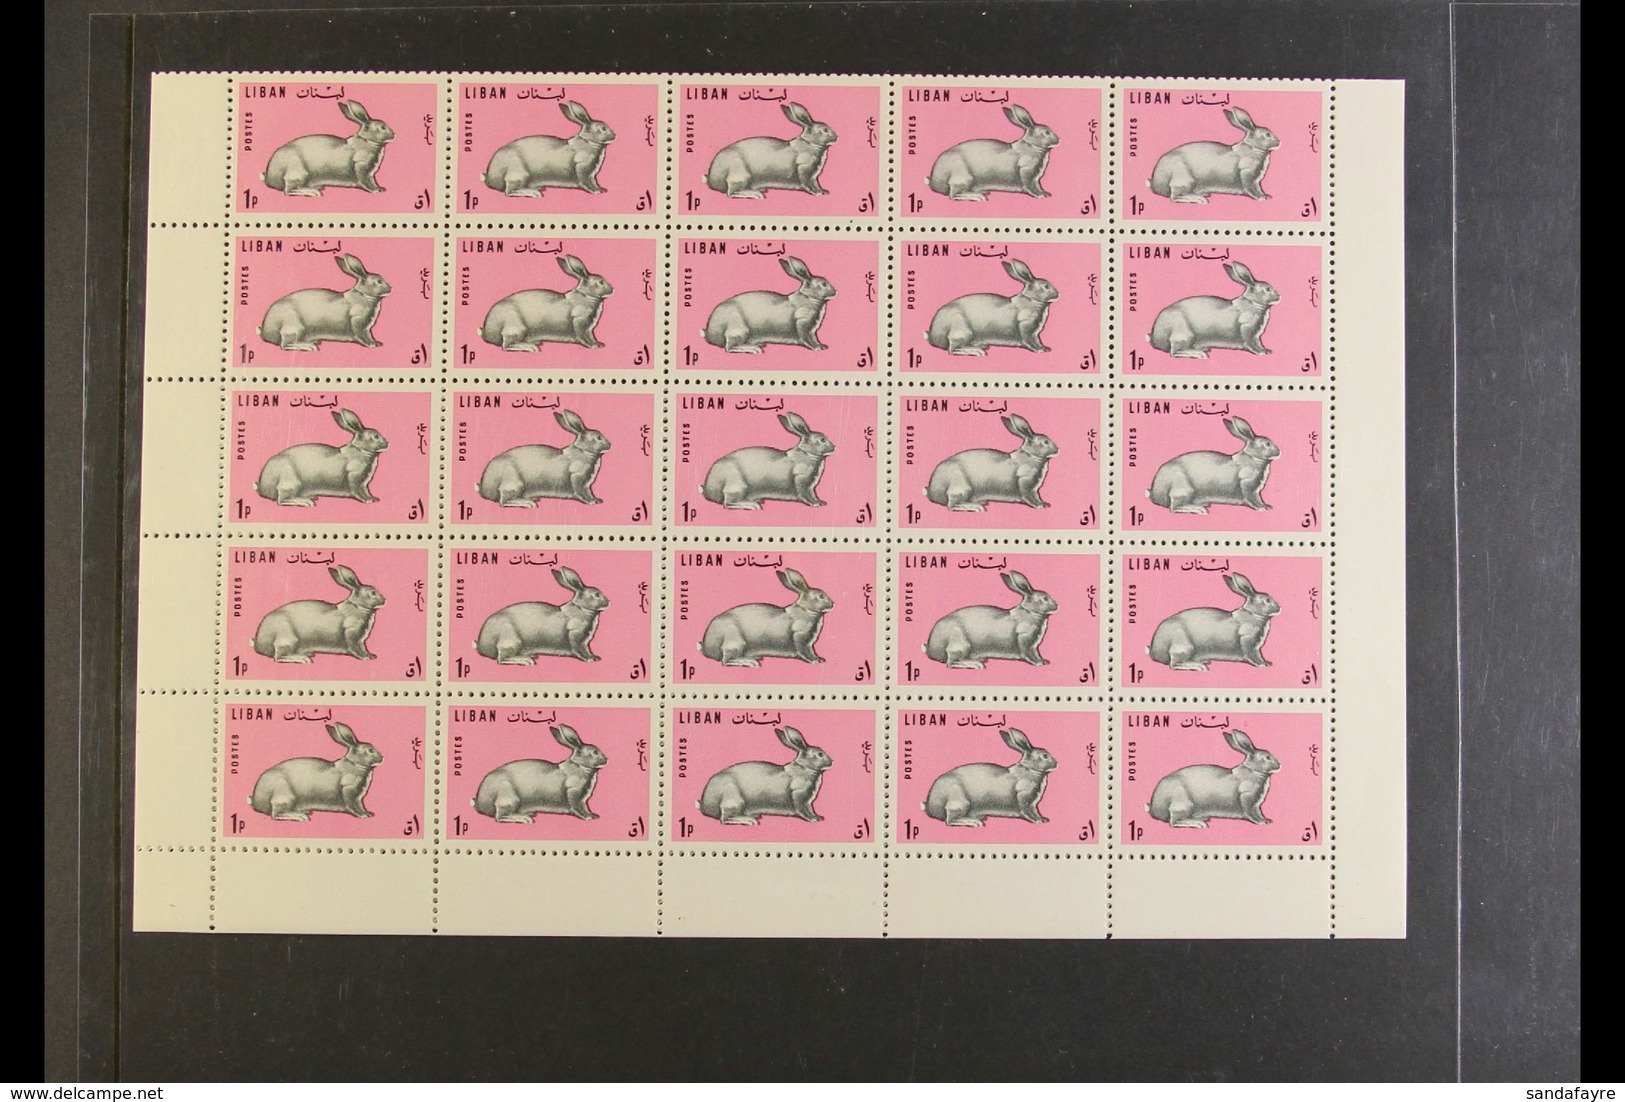 1965 Animals Complete Set, SG 884/86, Never Hinged Mint COMPLETE SHEETS Of 50, Very Fresh, Cat ££285+. (3 Sheets = 150 S - Liban